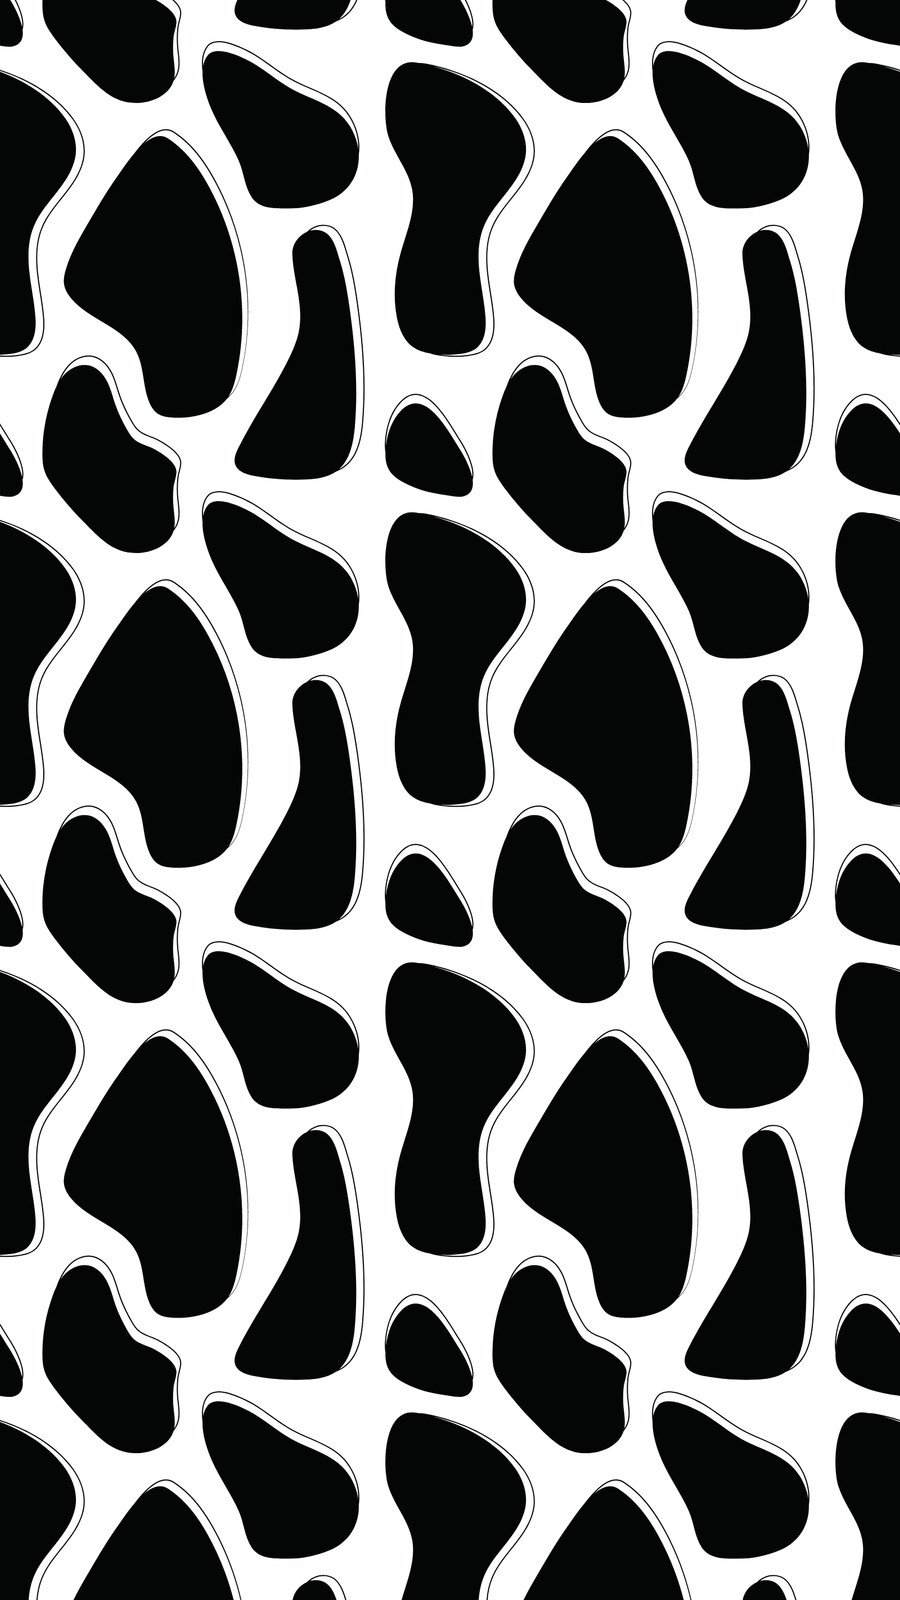 Cow Print Design Custom Wallpaper & Surface Covering